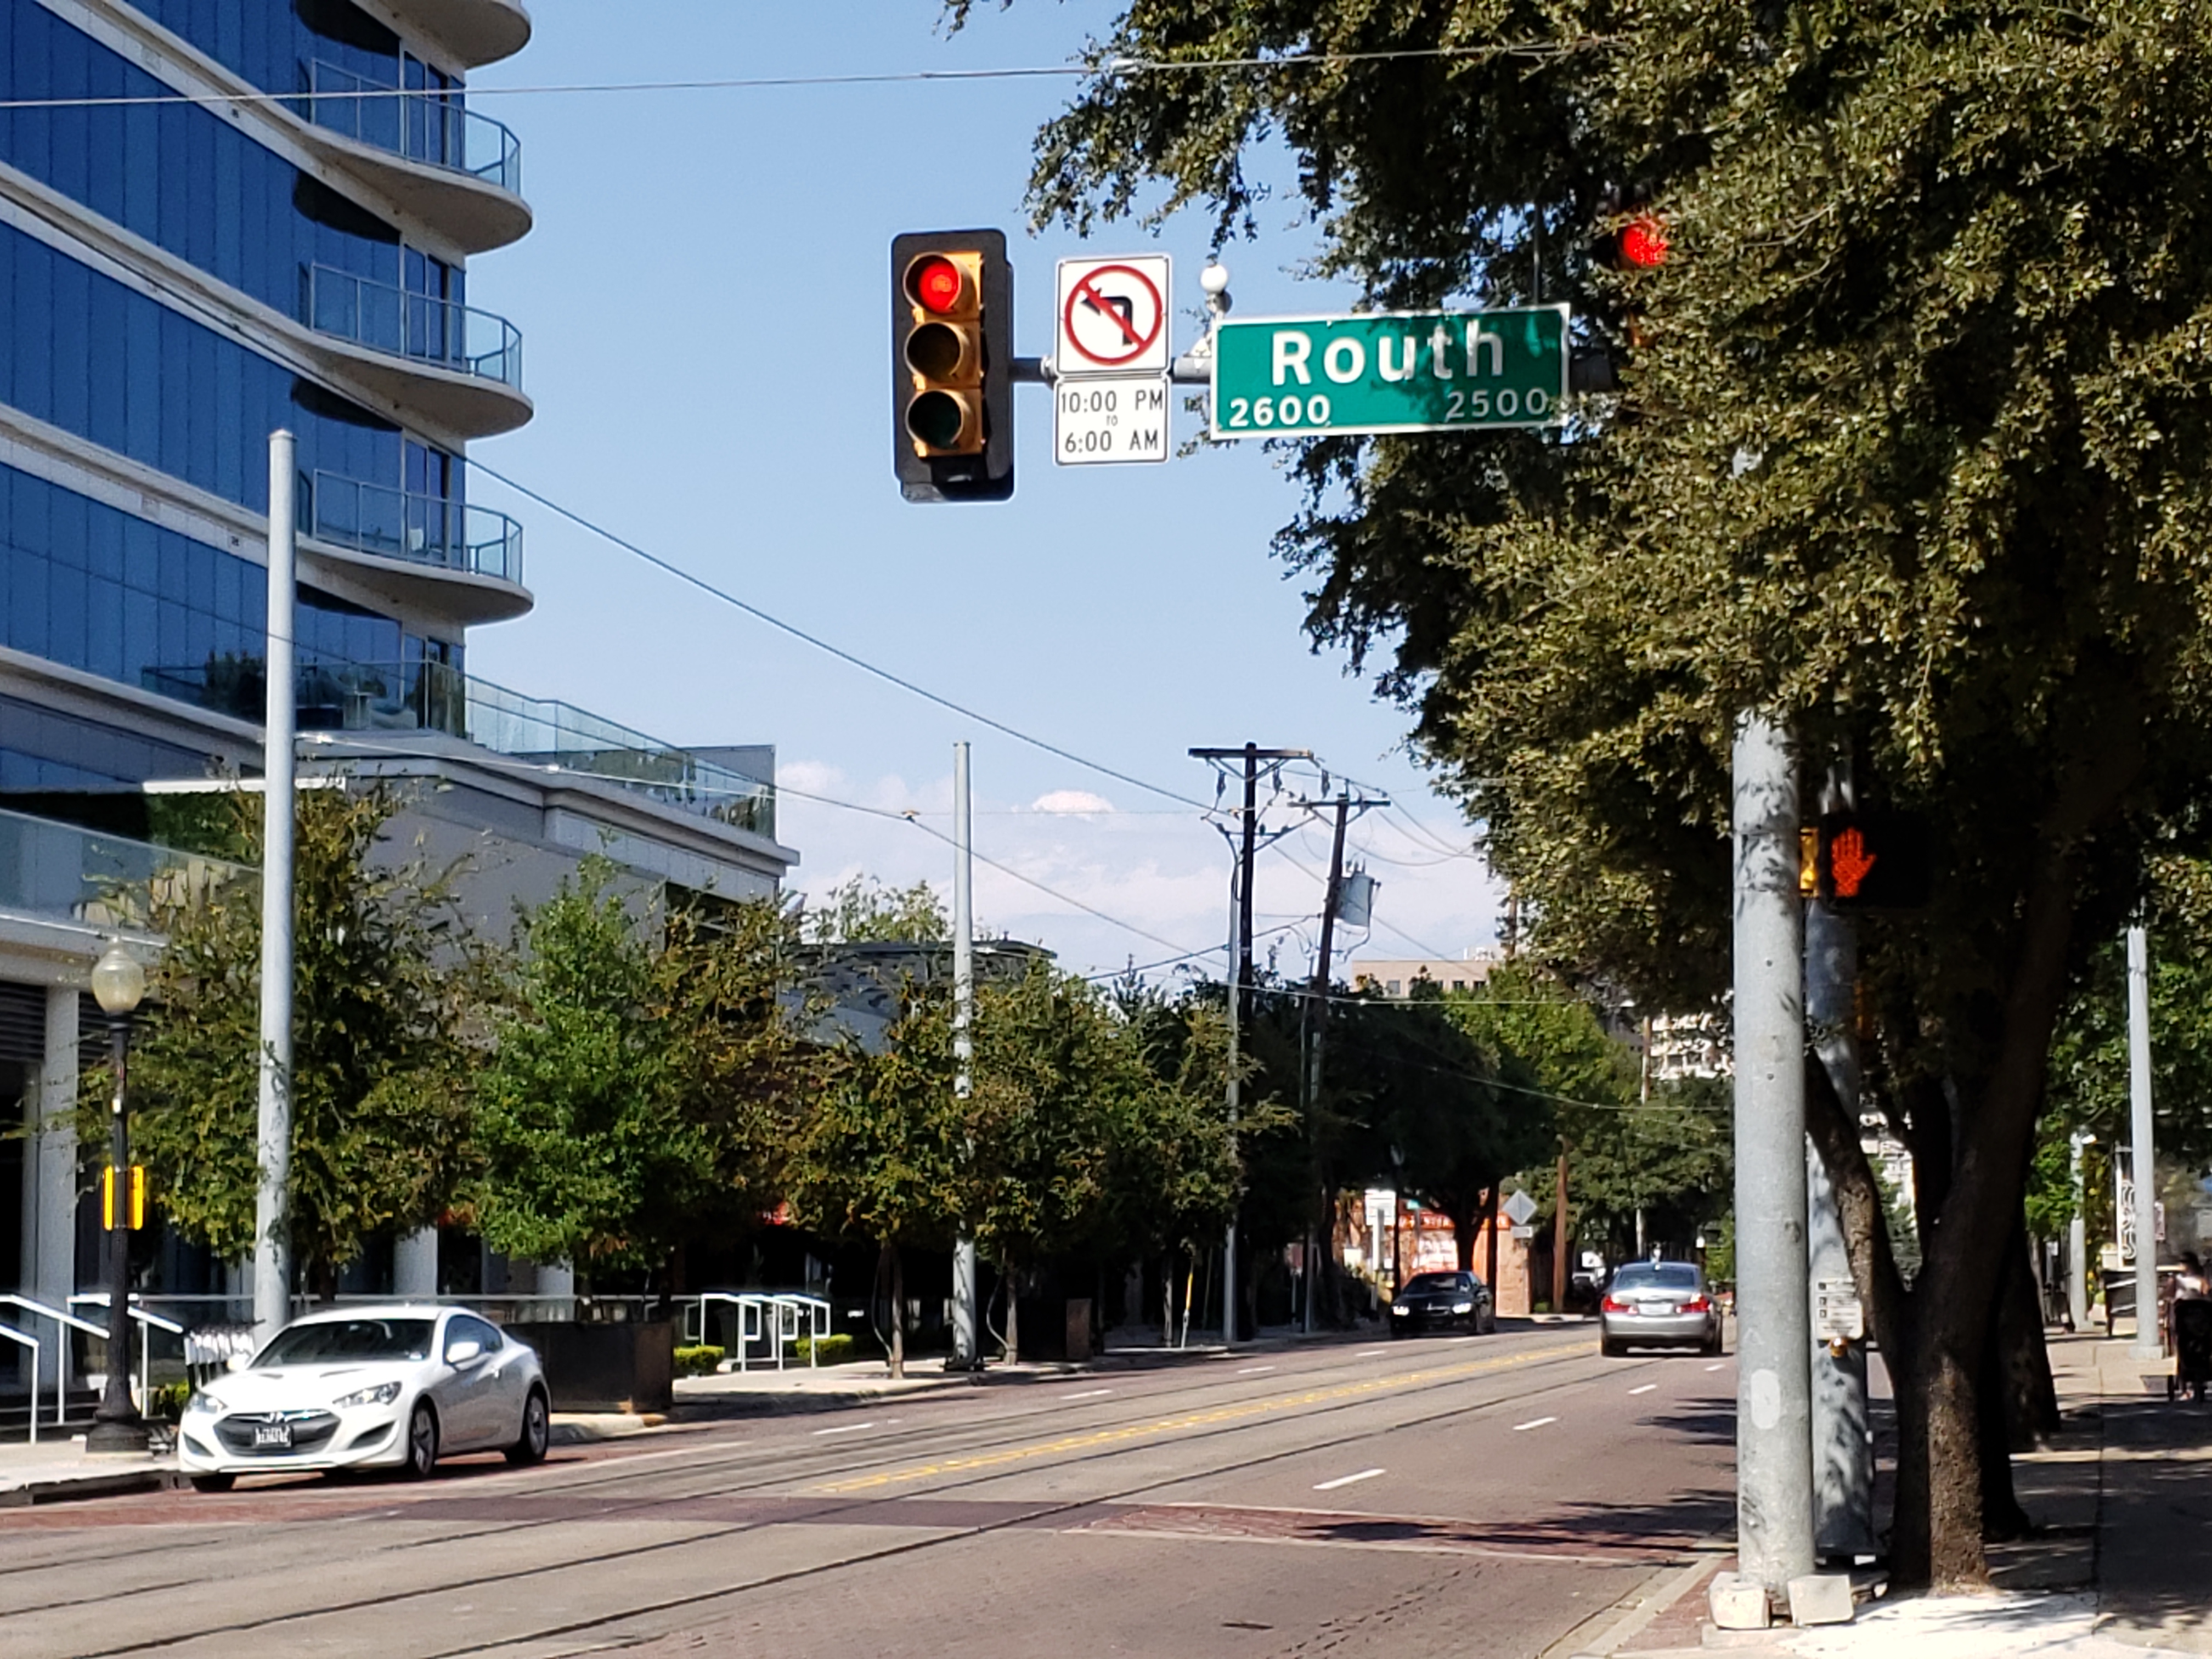 Routh South Uptown Dallas